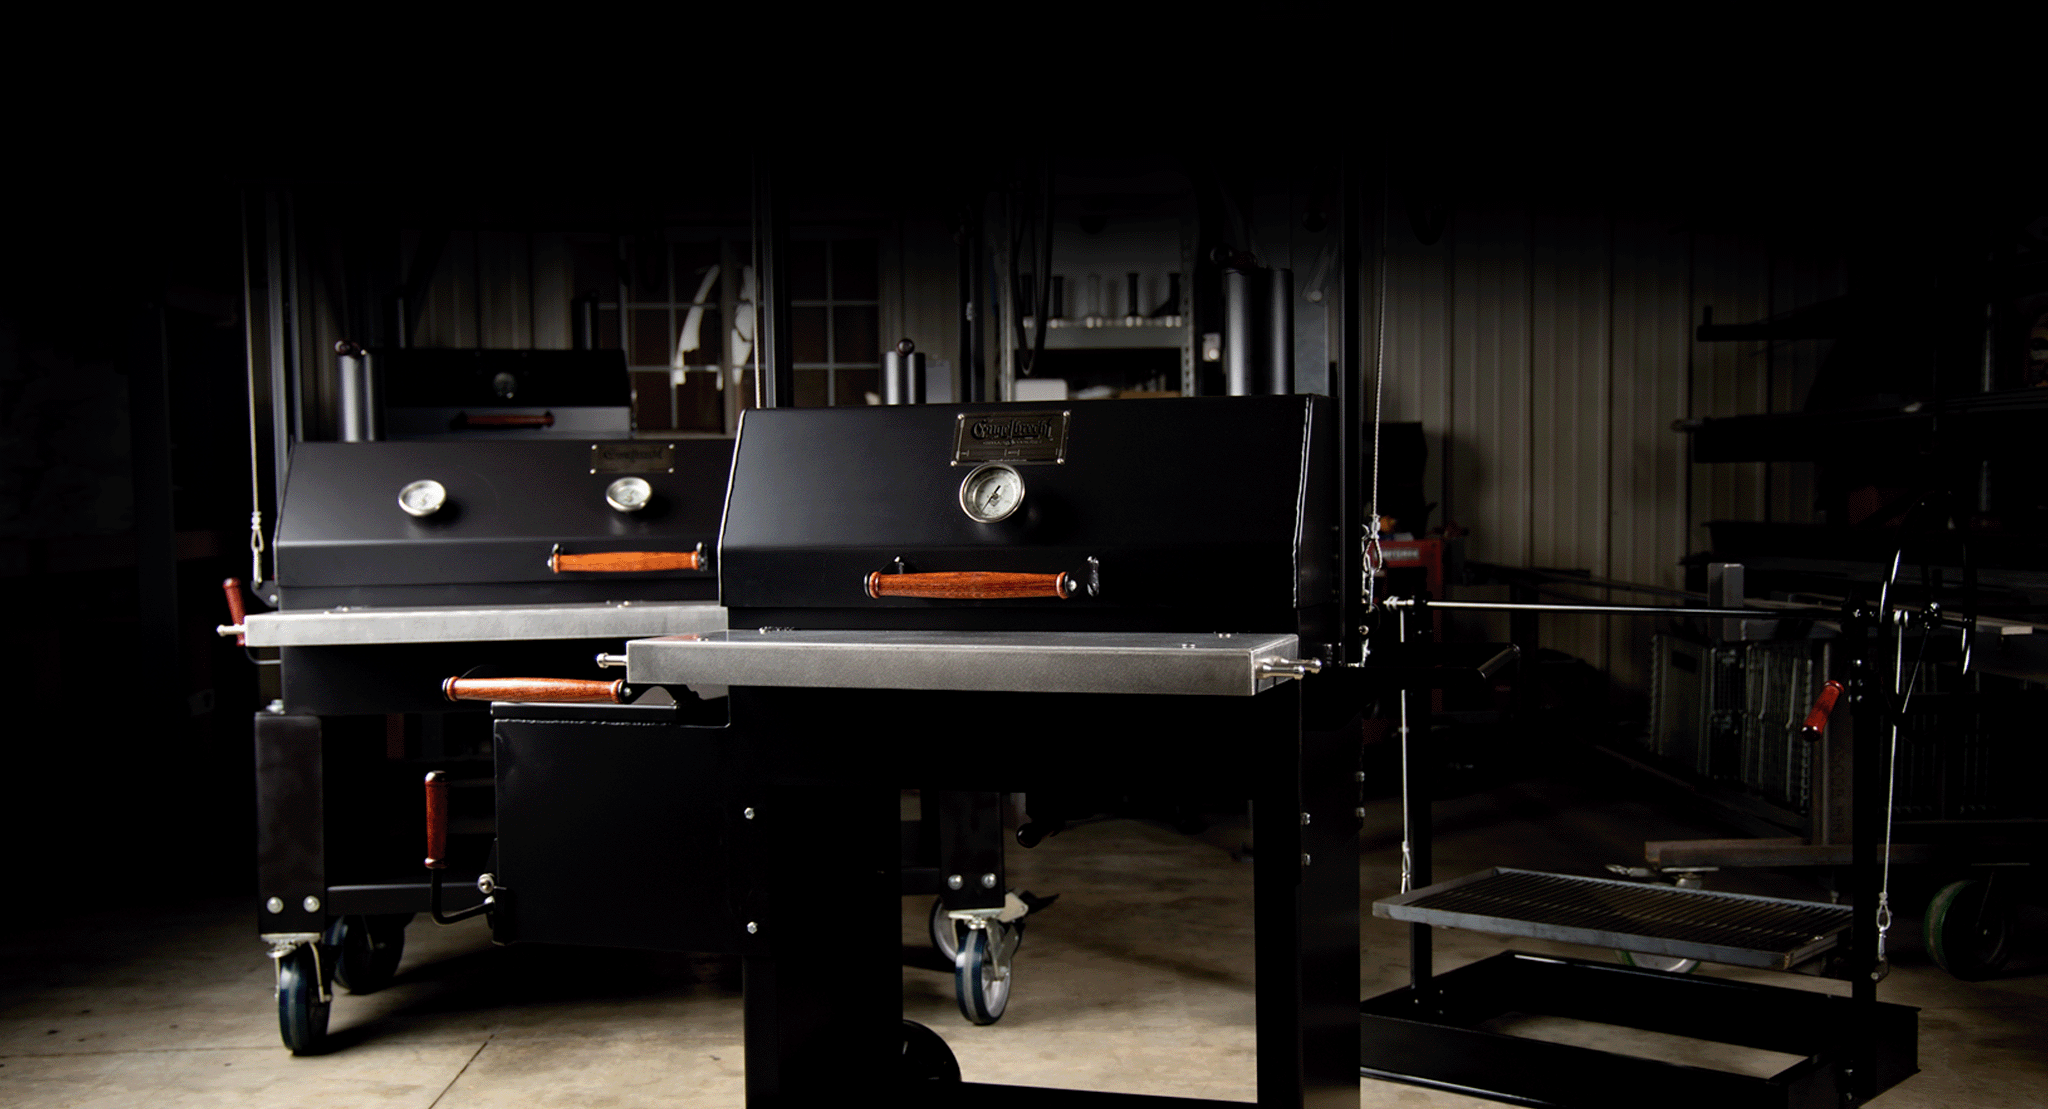 The lineup of Engelbrecht grills against the dark background of the production shop